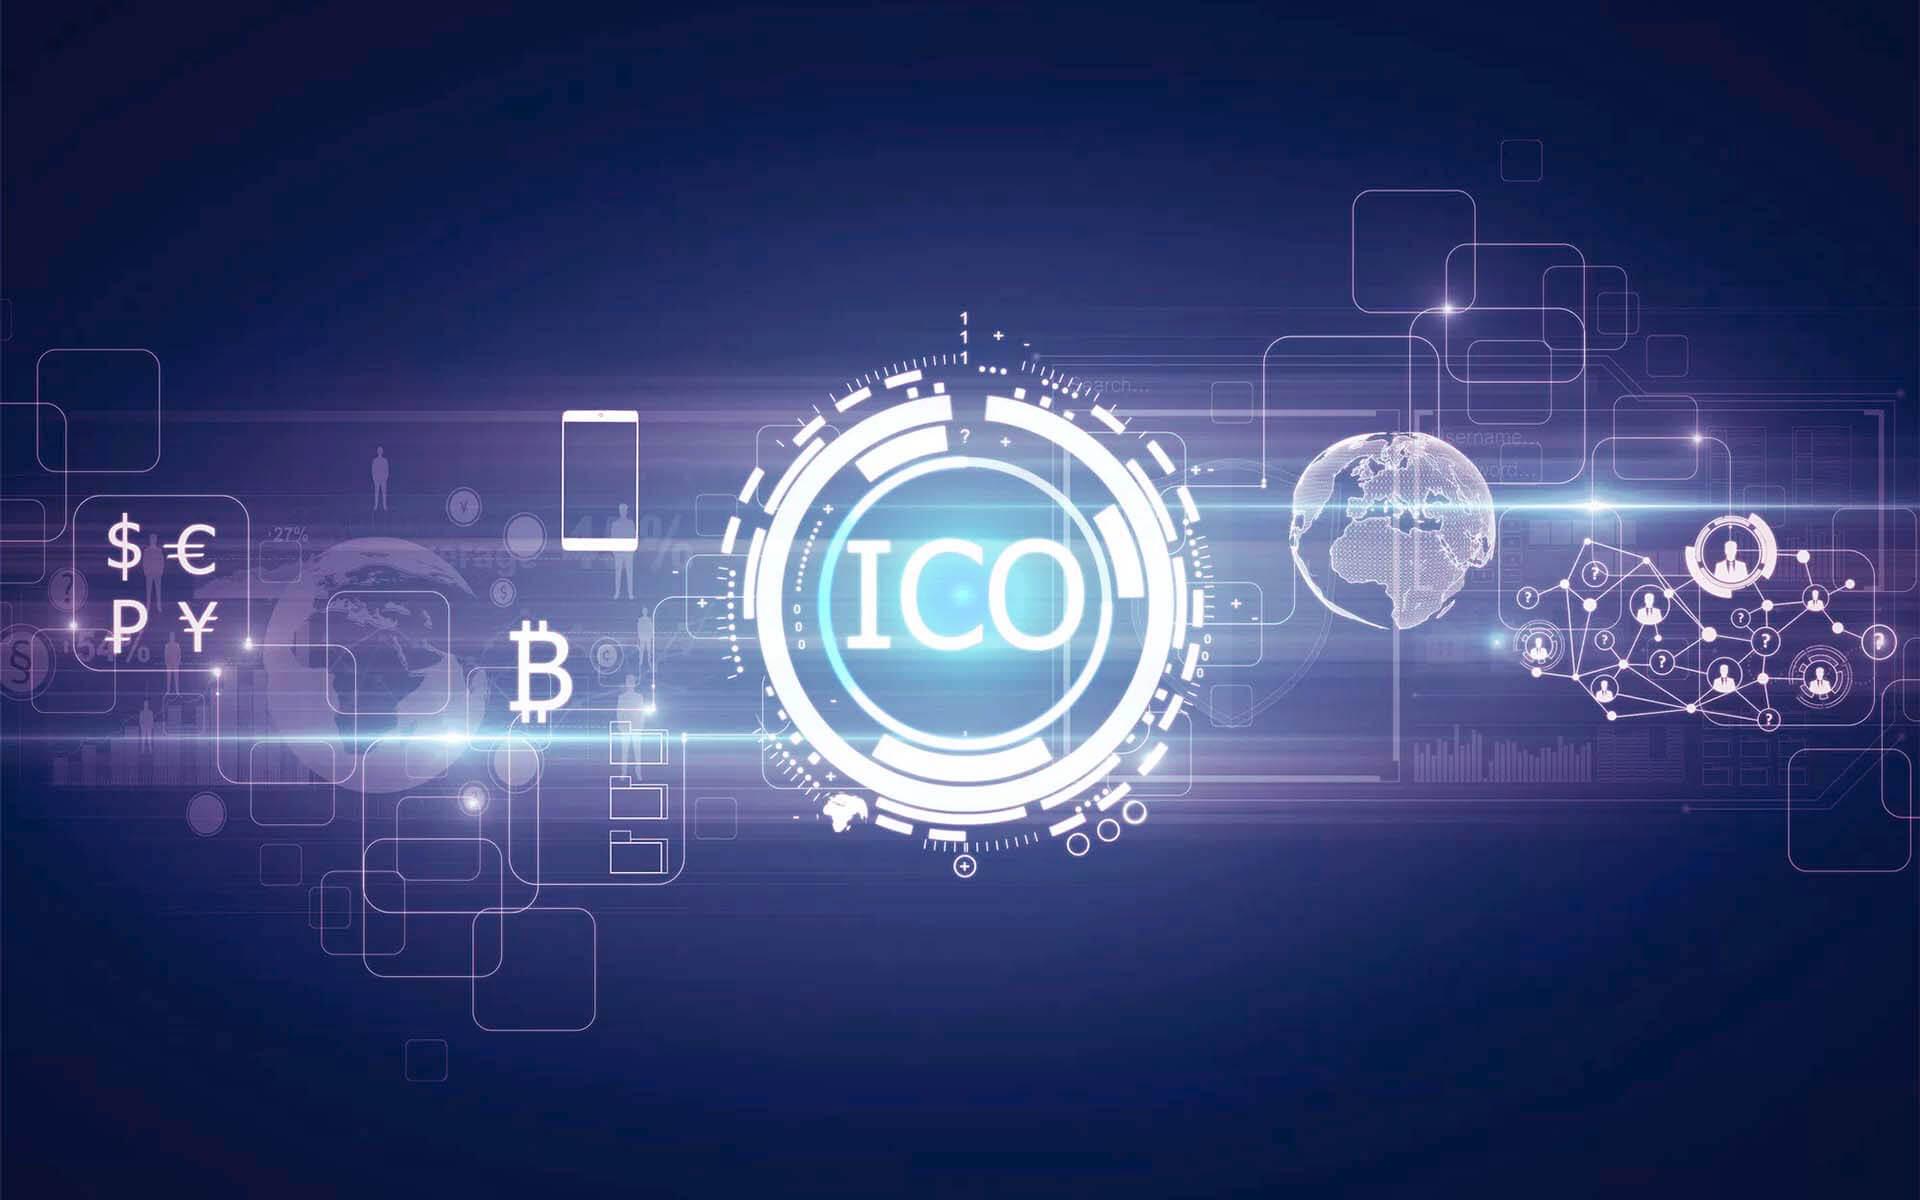 The Crypto Takeover: ICOs, Tokens and the Funding in 2018